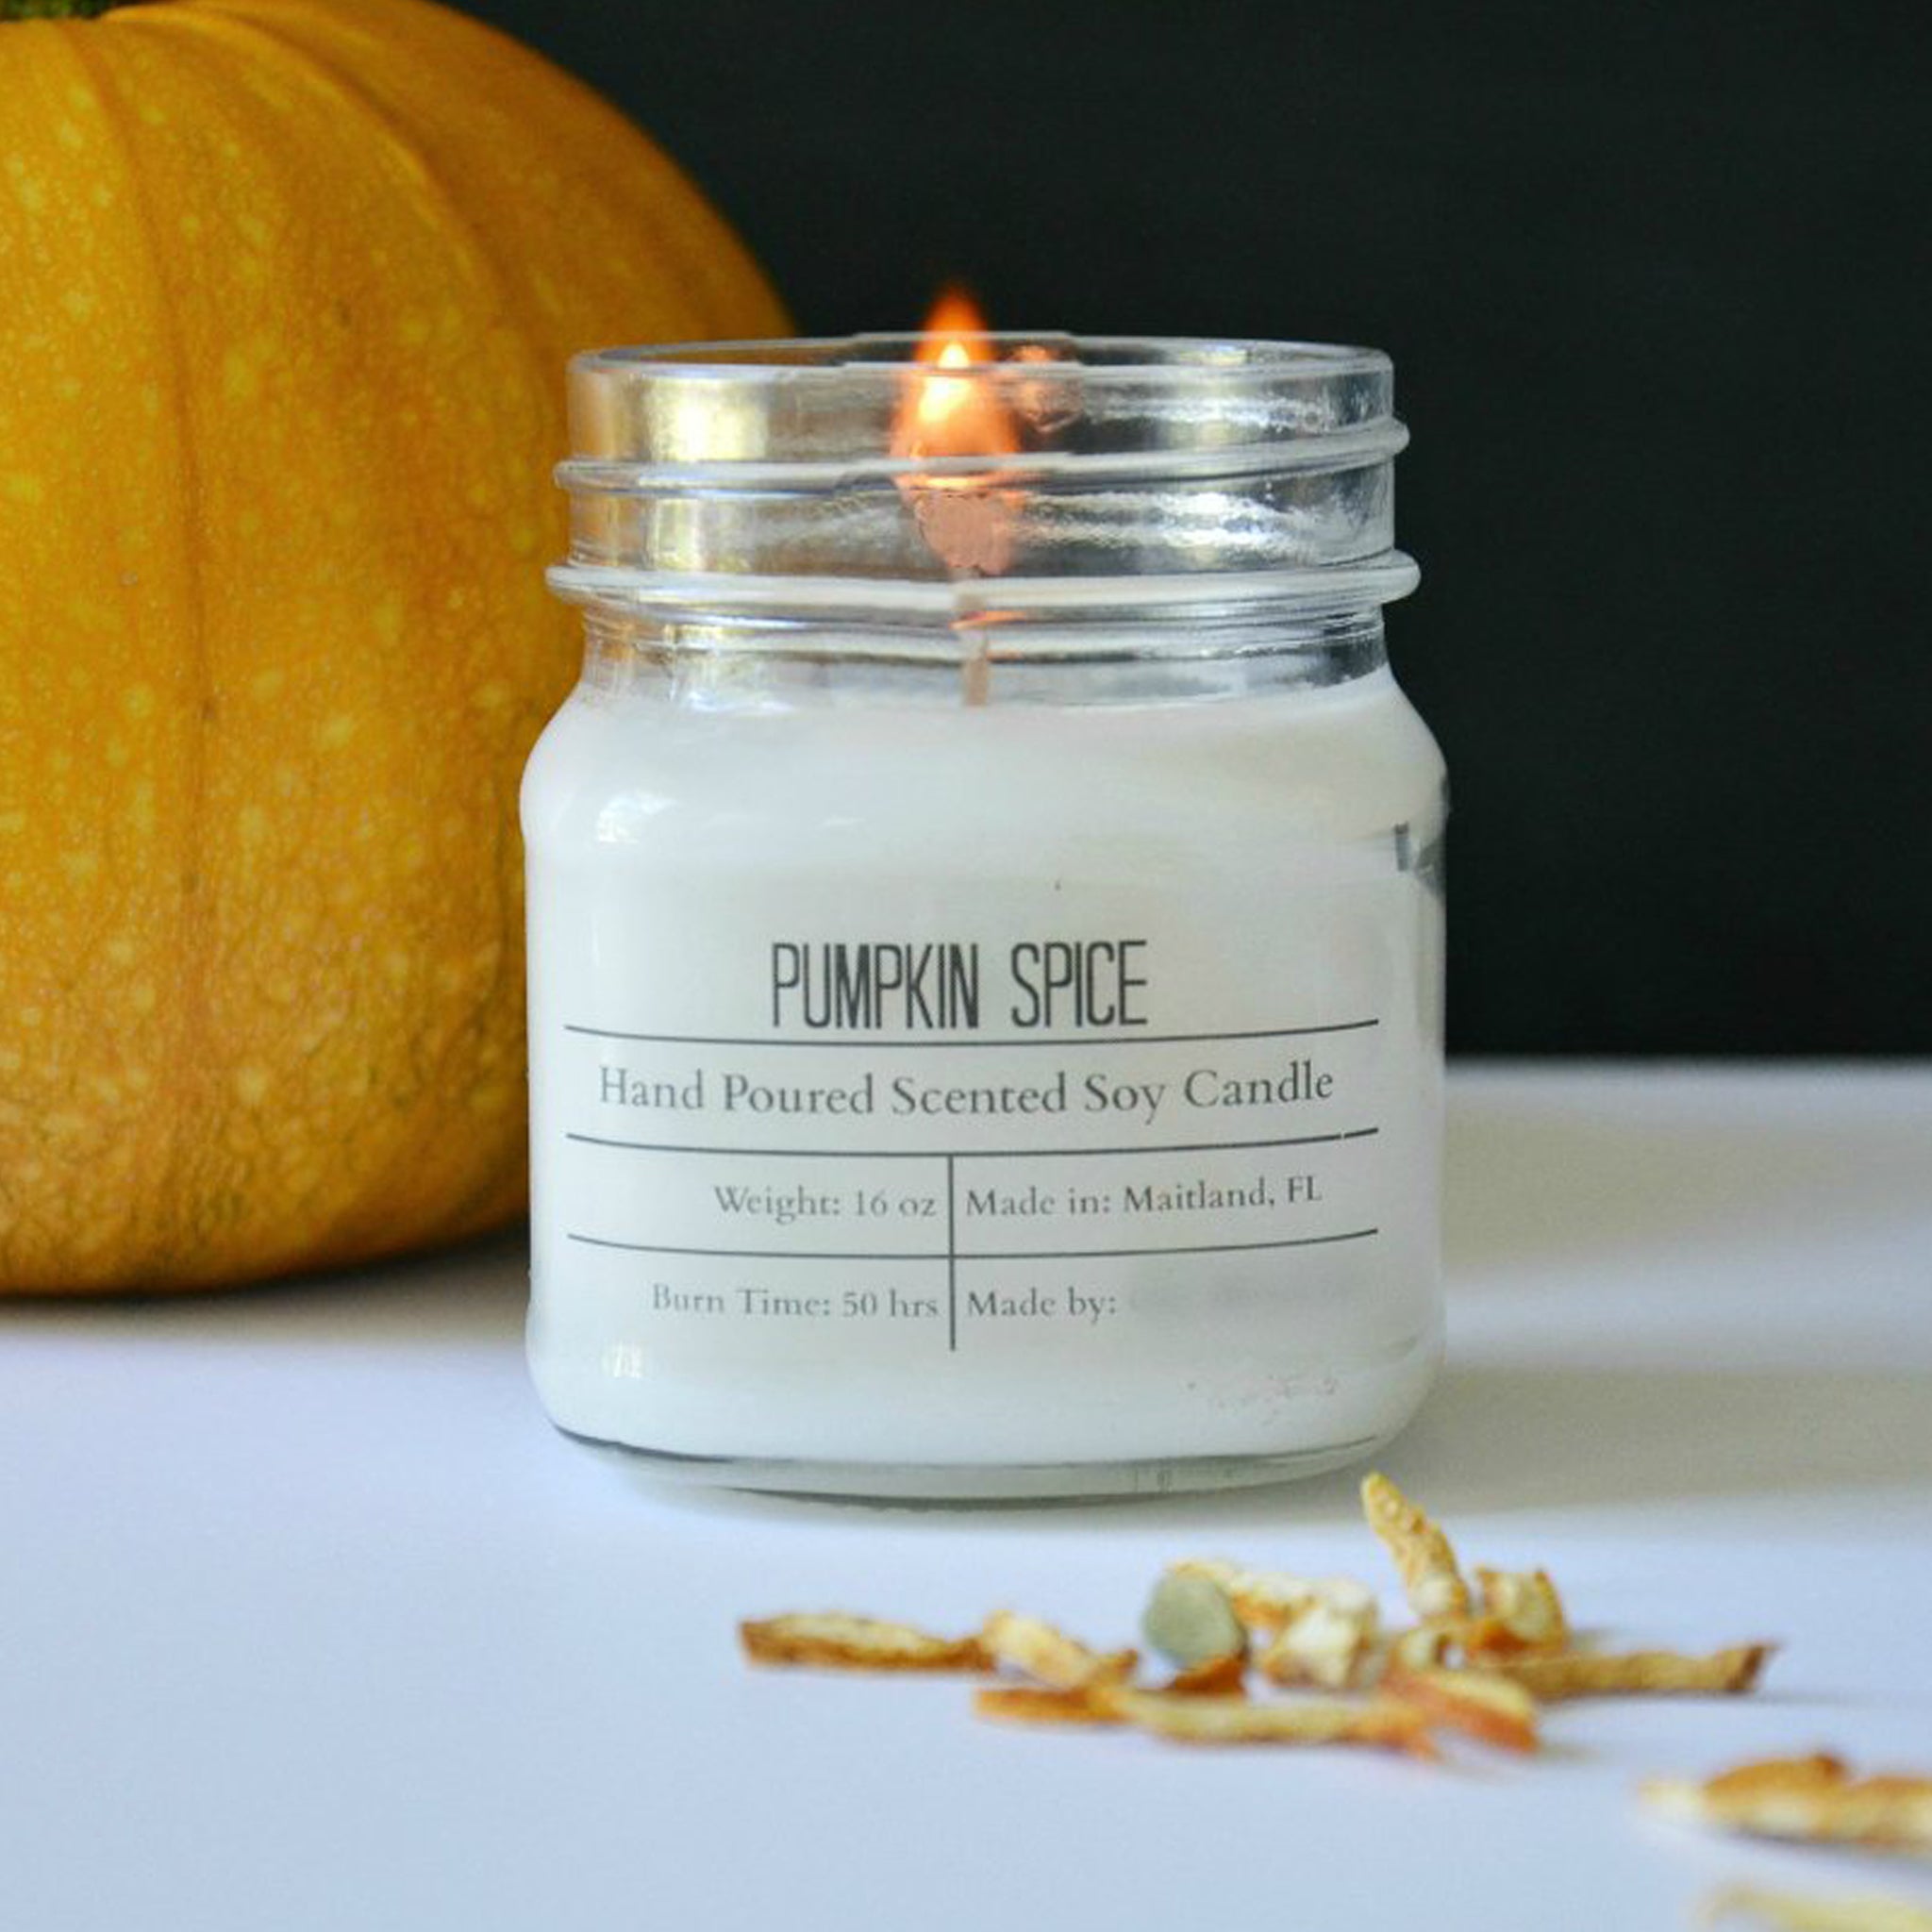 Fall Scented Candles - 50 Hour Burn Time Soy Wax Candles - Oily BlendsFall Scented Candles - 50 Hour Burn Time Soy Wax Candles